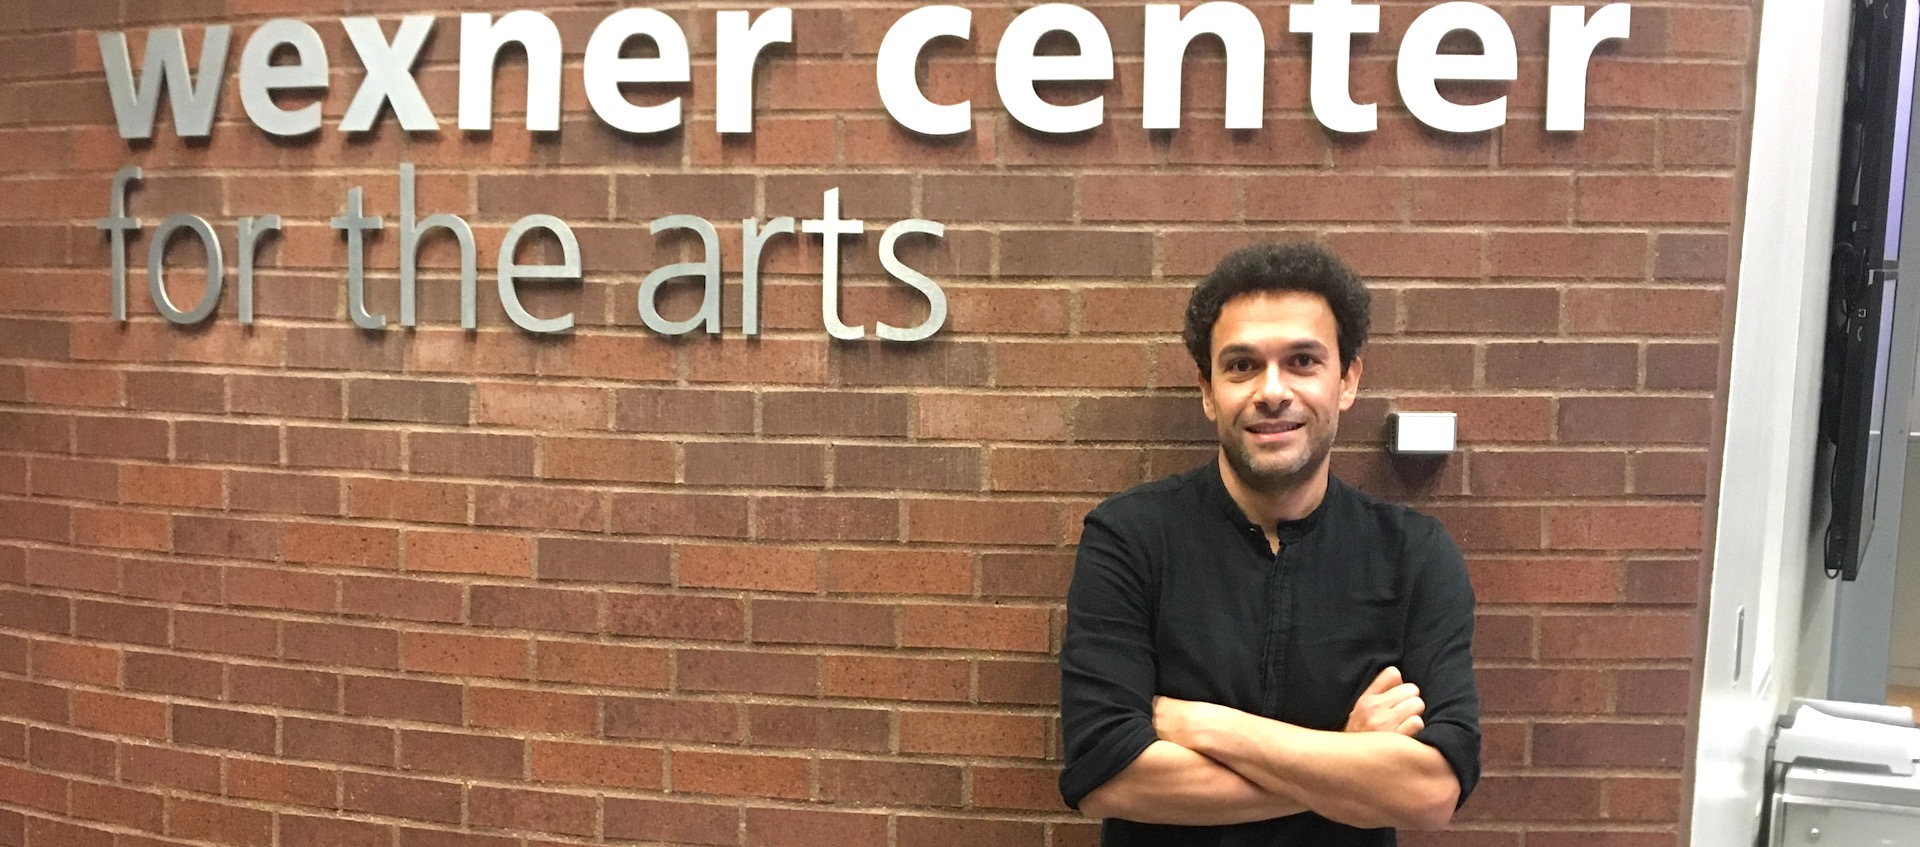 Filmmaker Tamer El Said stands against a brick wall with the Wexner Center for the Arts logo in brushed metal lettering above him